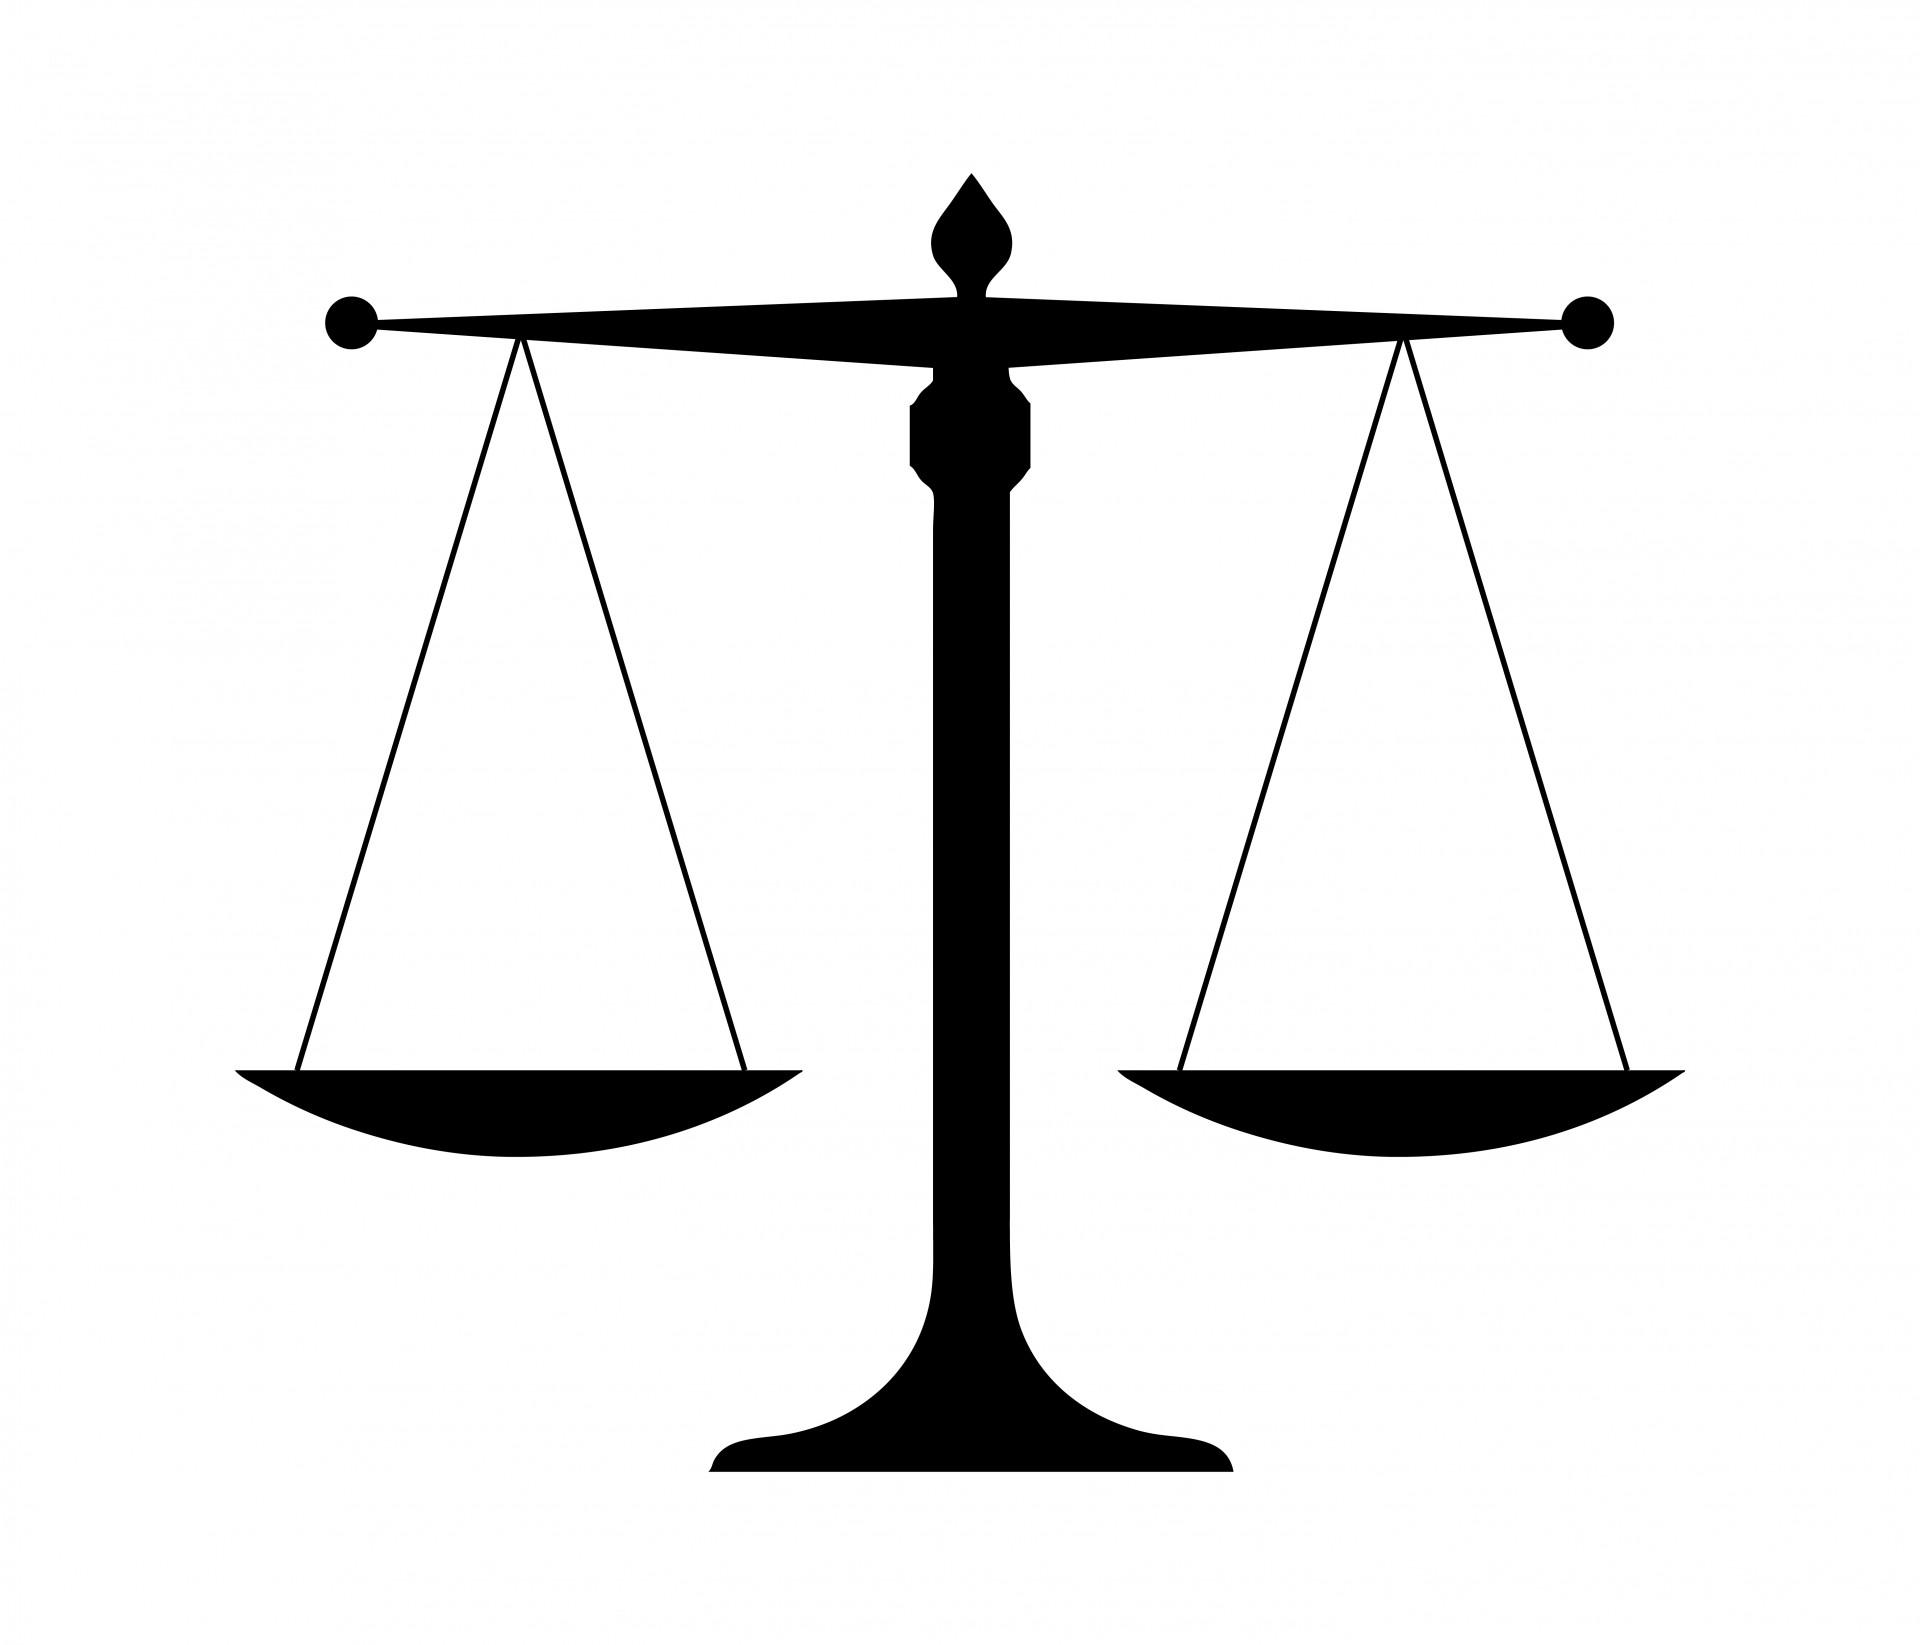 scales of justice clip art black and white - Clipground